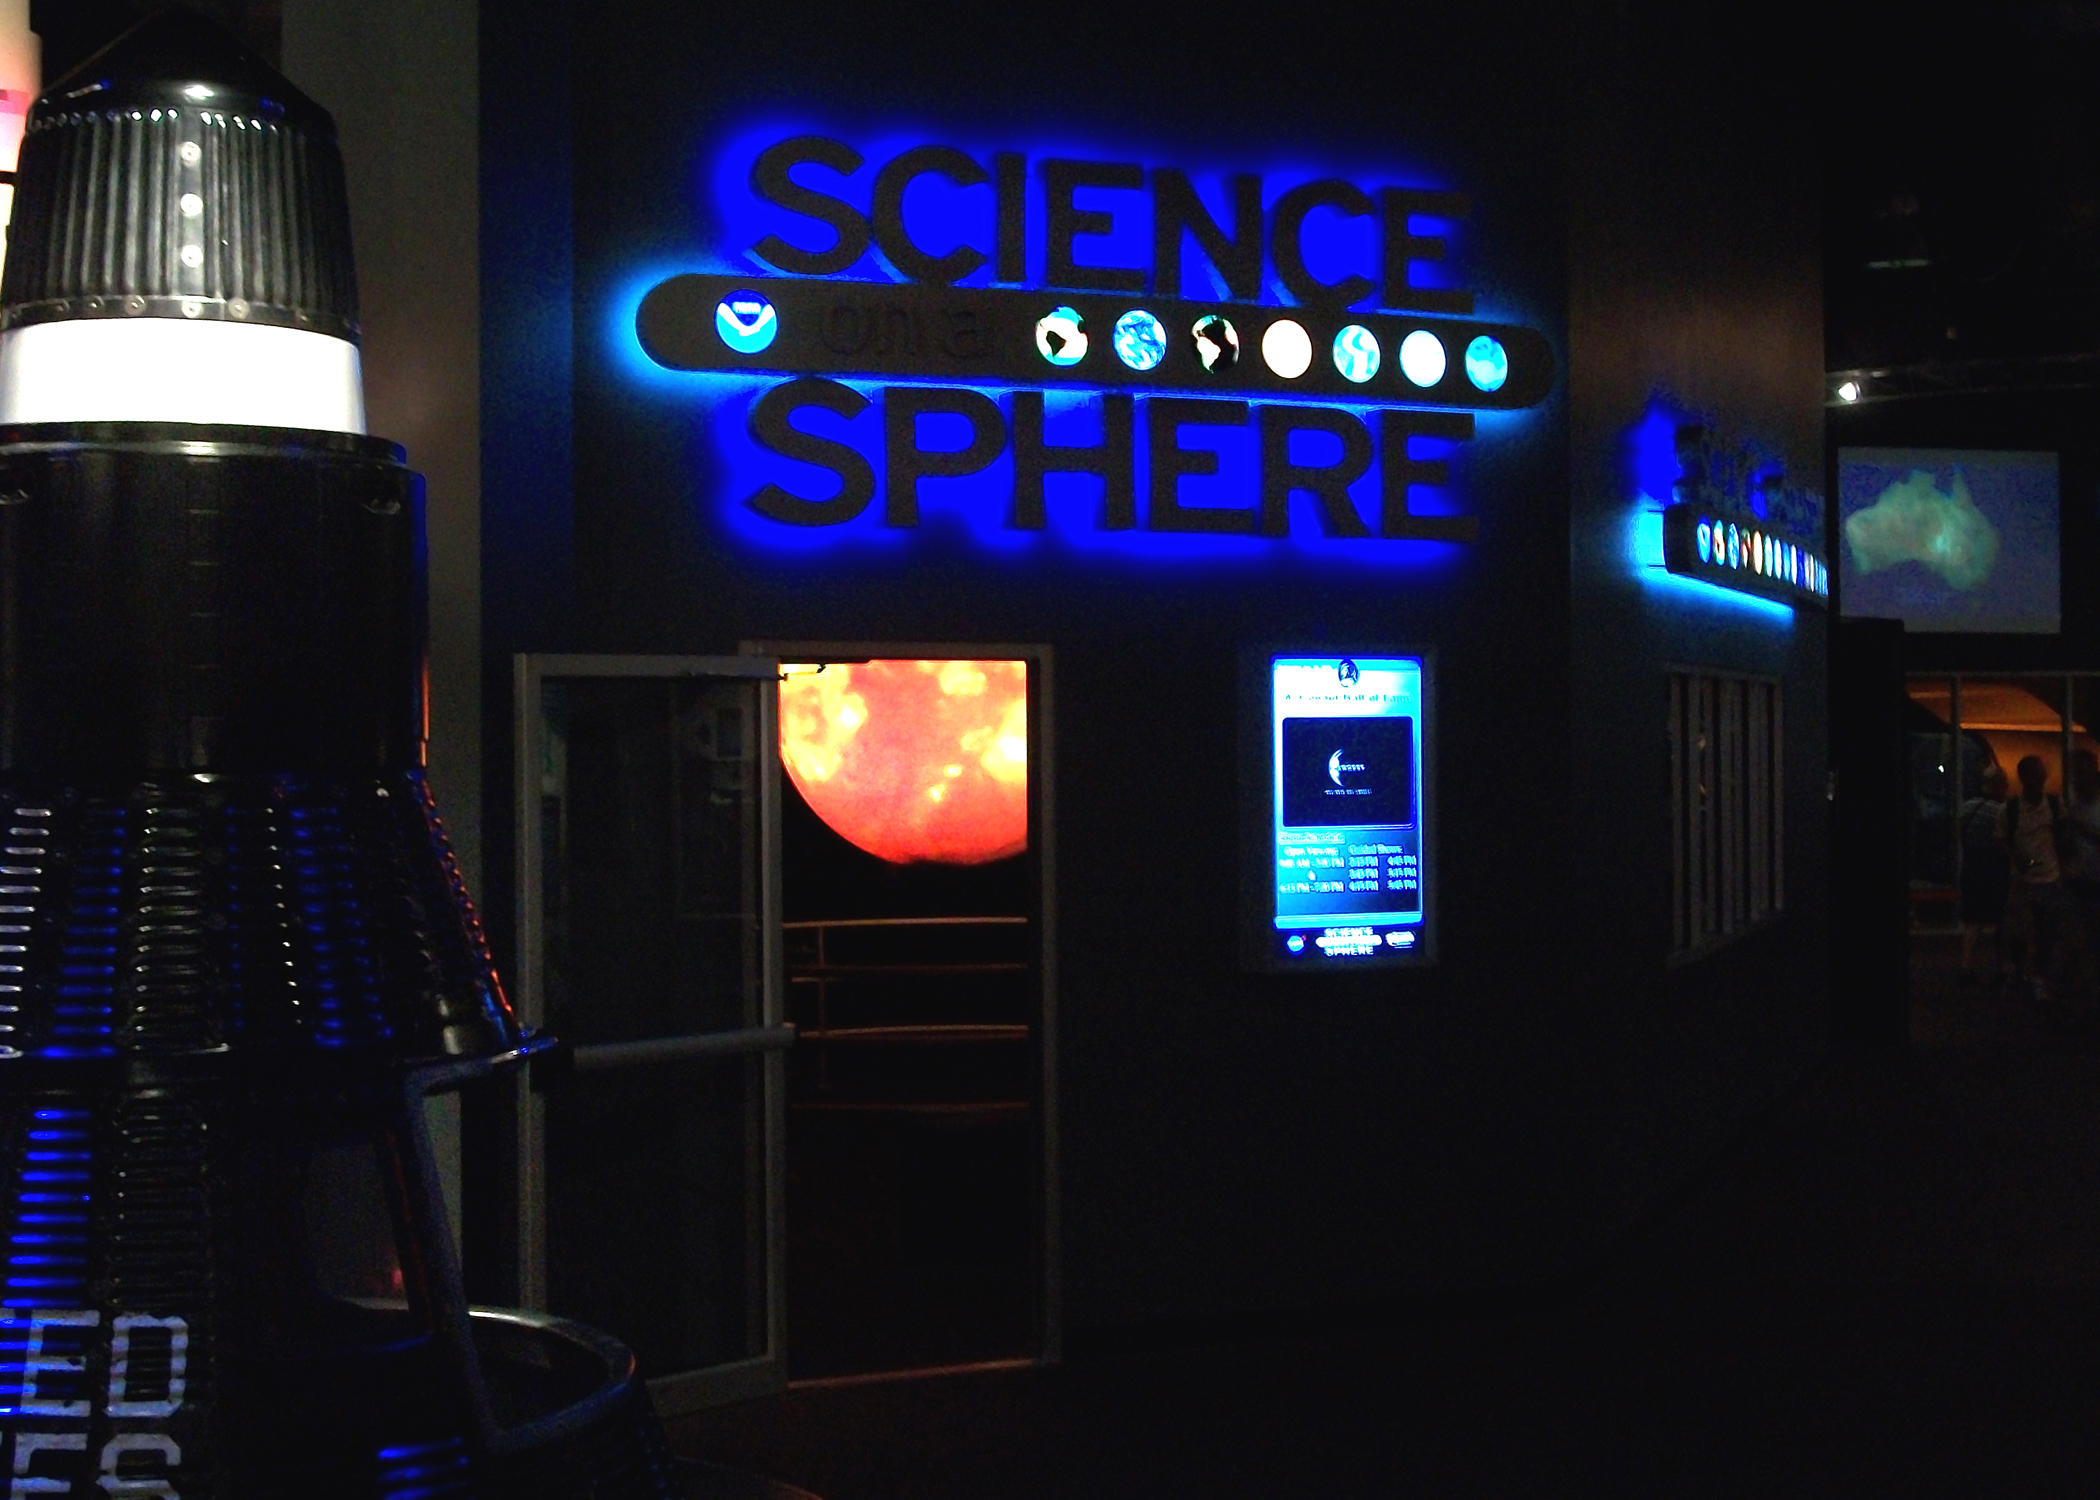 Science On a Sphere is just visible through an open door to a darkened theater. It displays imagery of the Sun